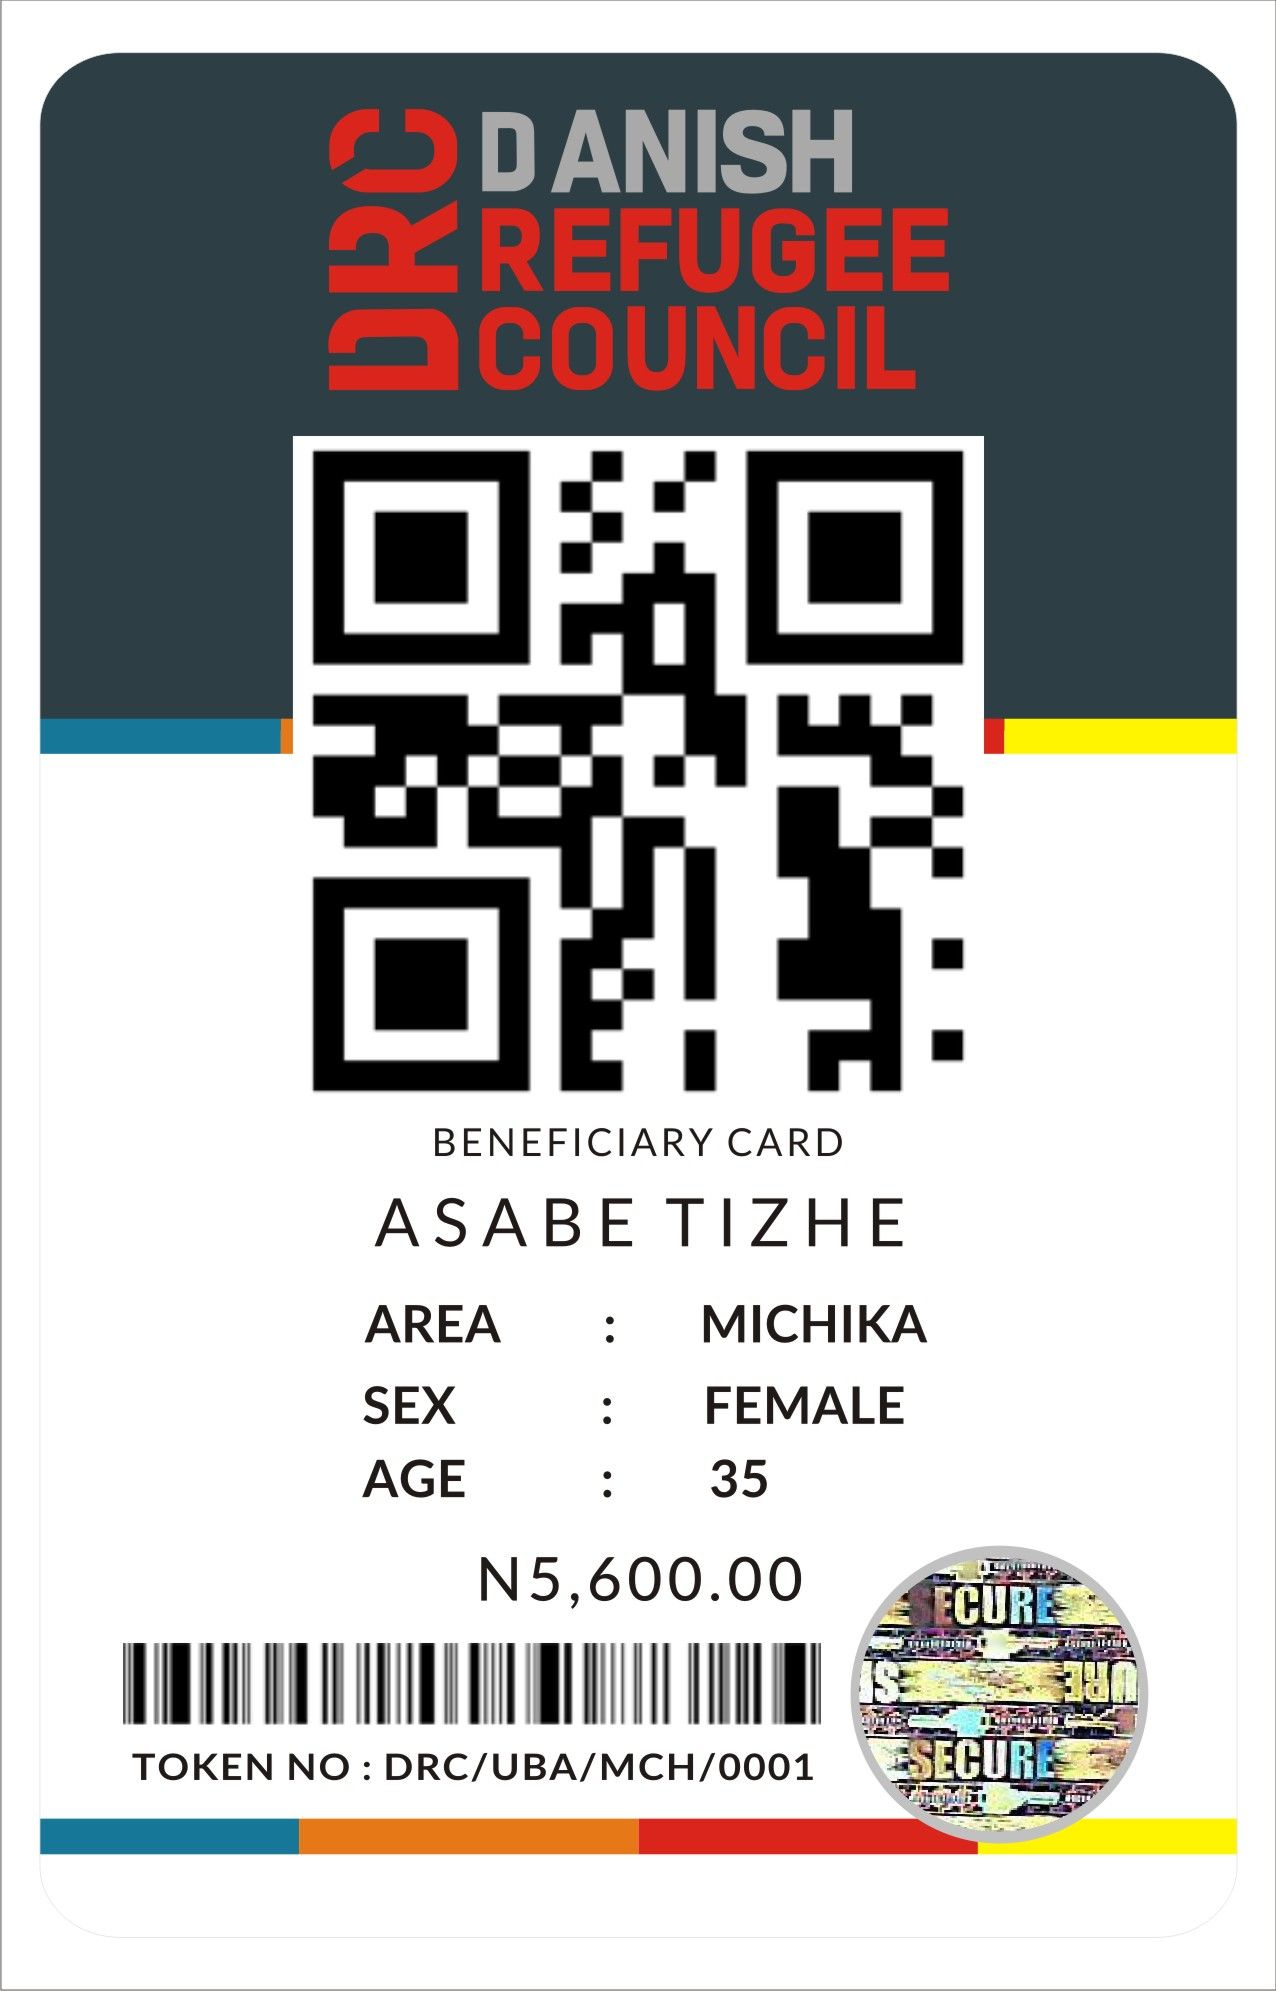 CALL CHINEDU ON 08179651585 TO PRINT ADHESIVE AUTHENTICATION LABELs SUCH AS BAR CODE STICKERS, QR CODE STICKERS, ETC